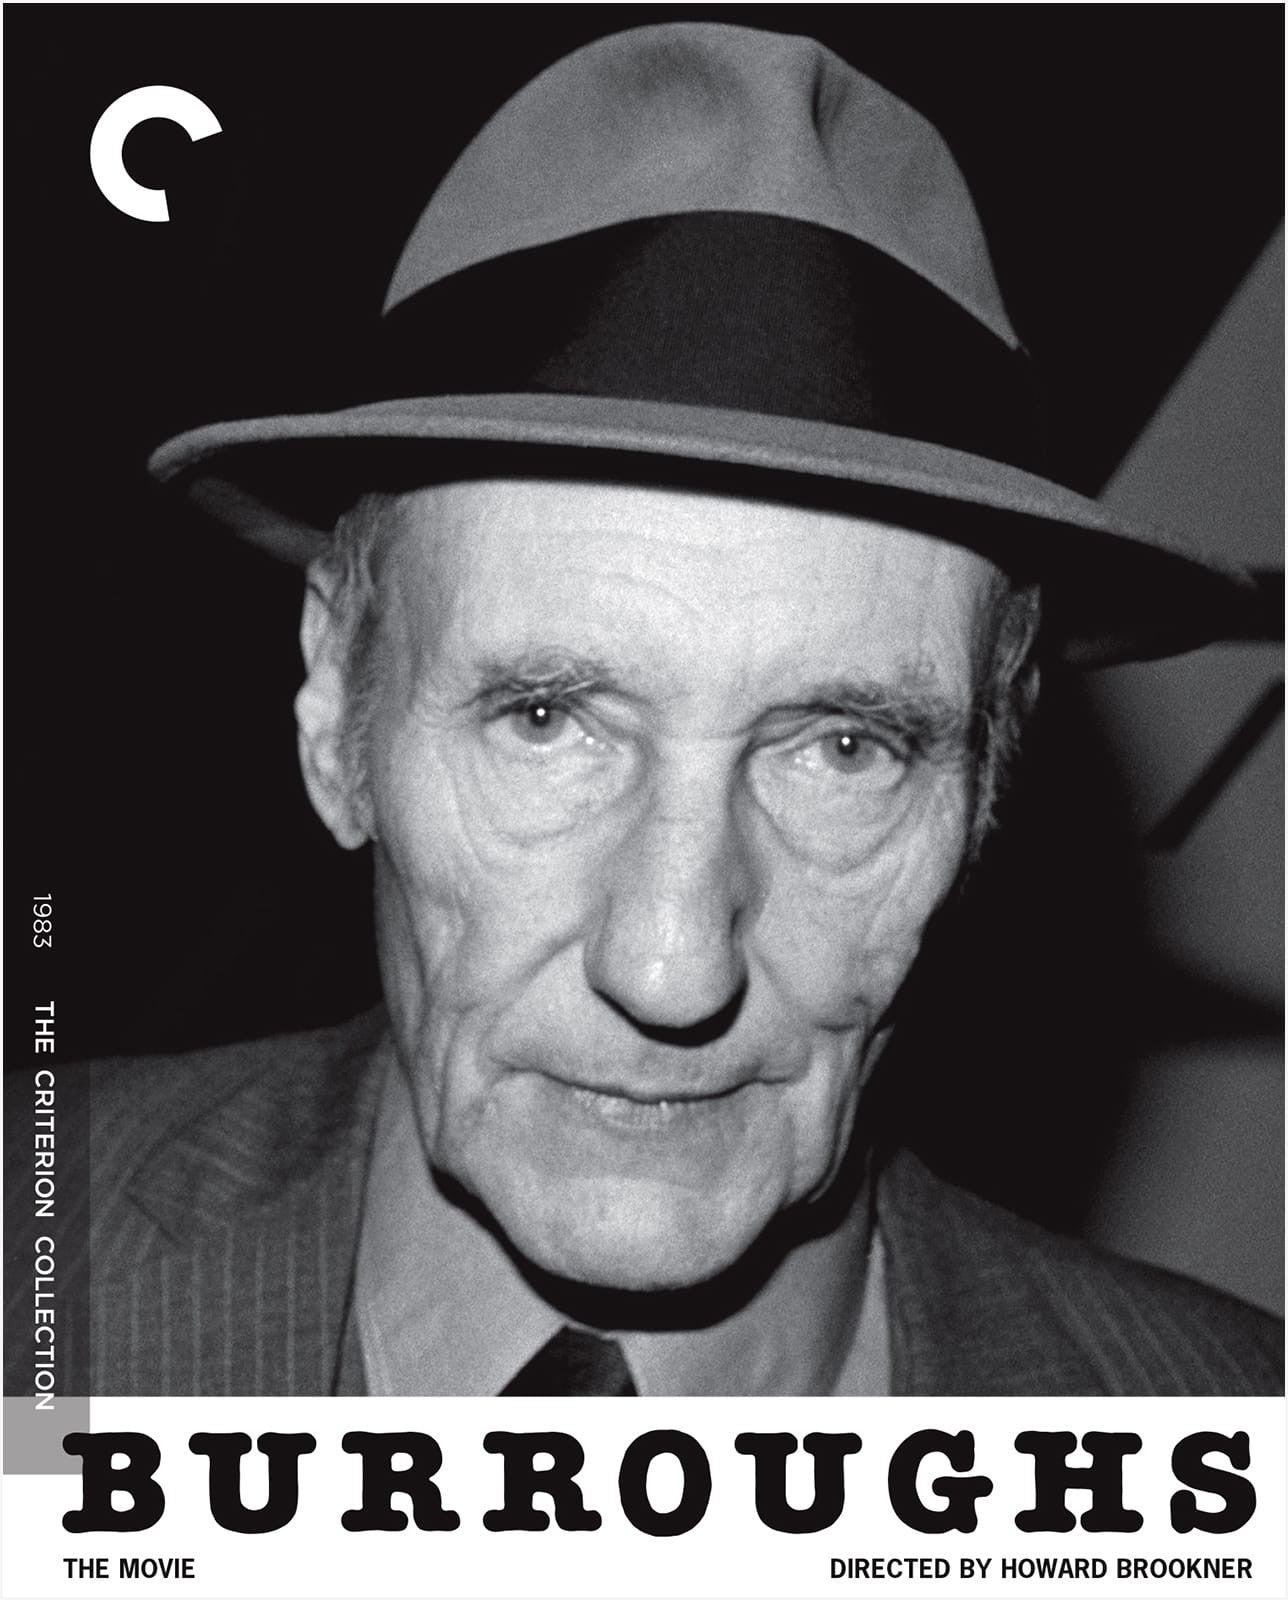 Burroughs: The Movie - Criterion Collection (Blu-ray)